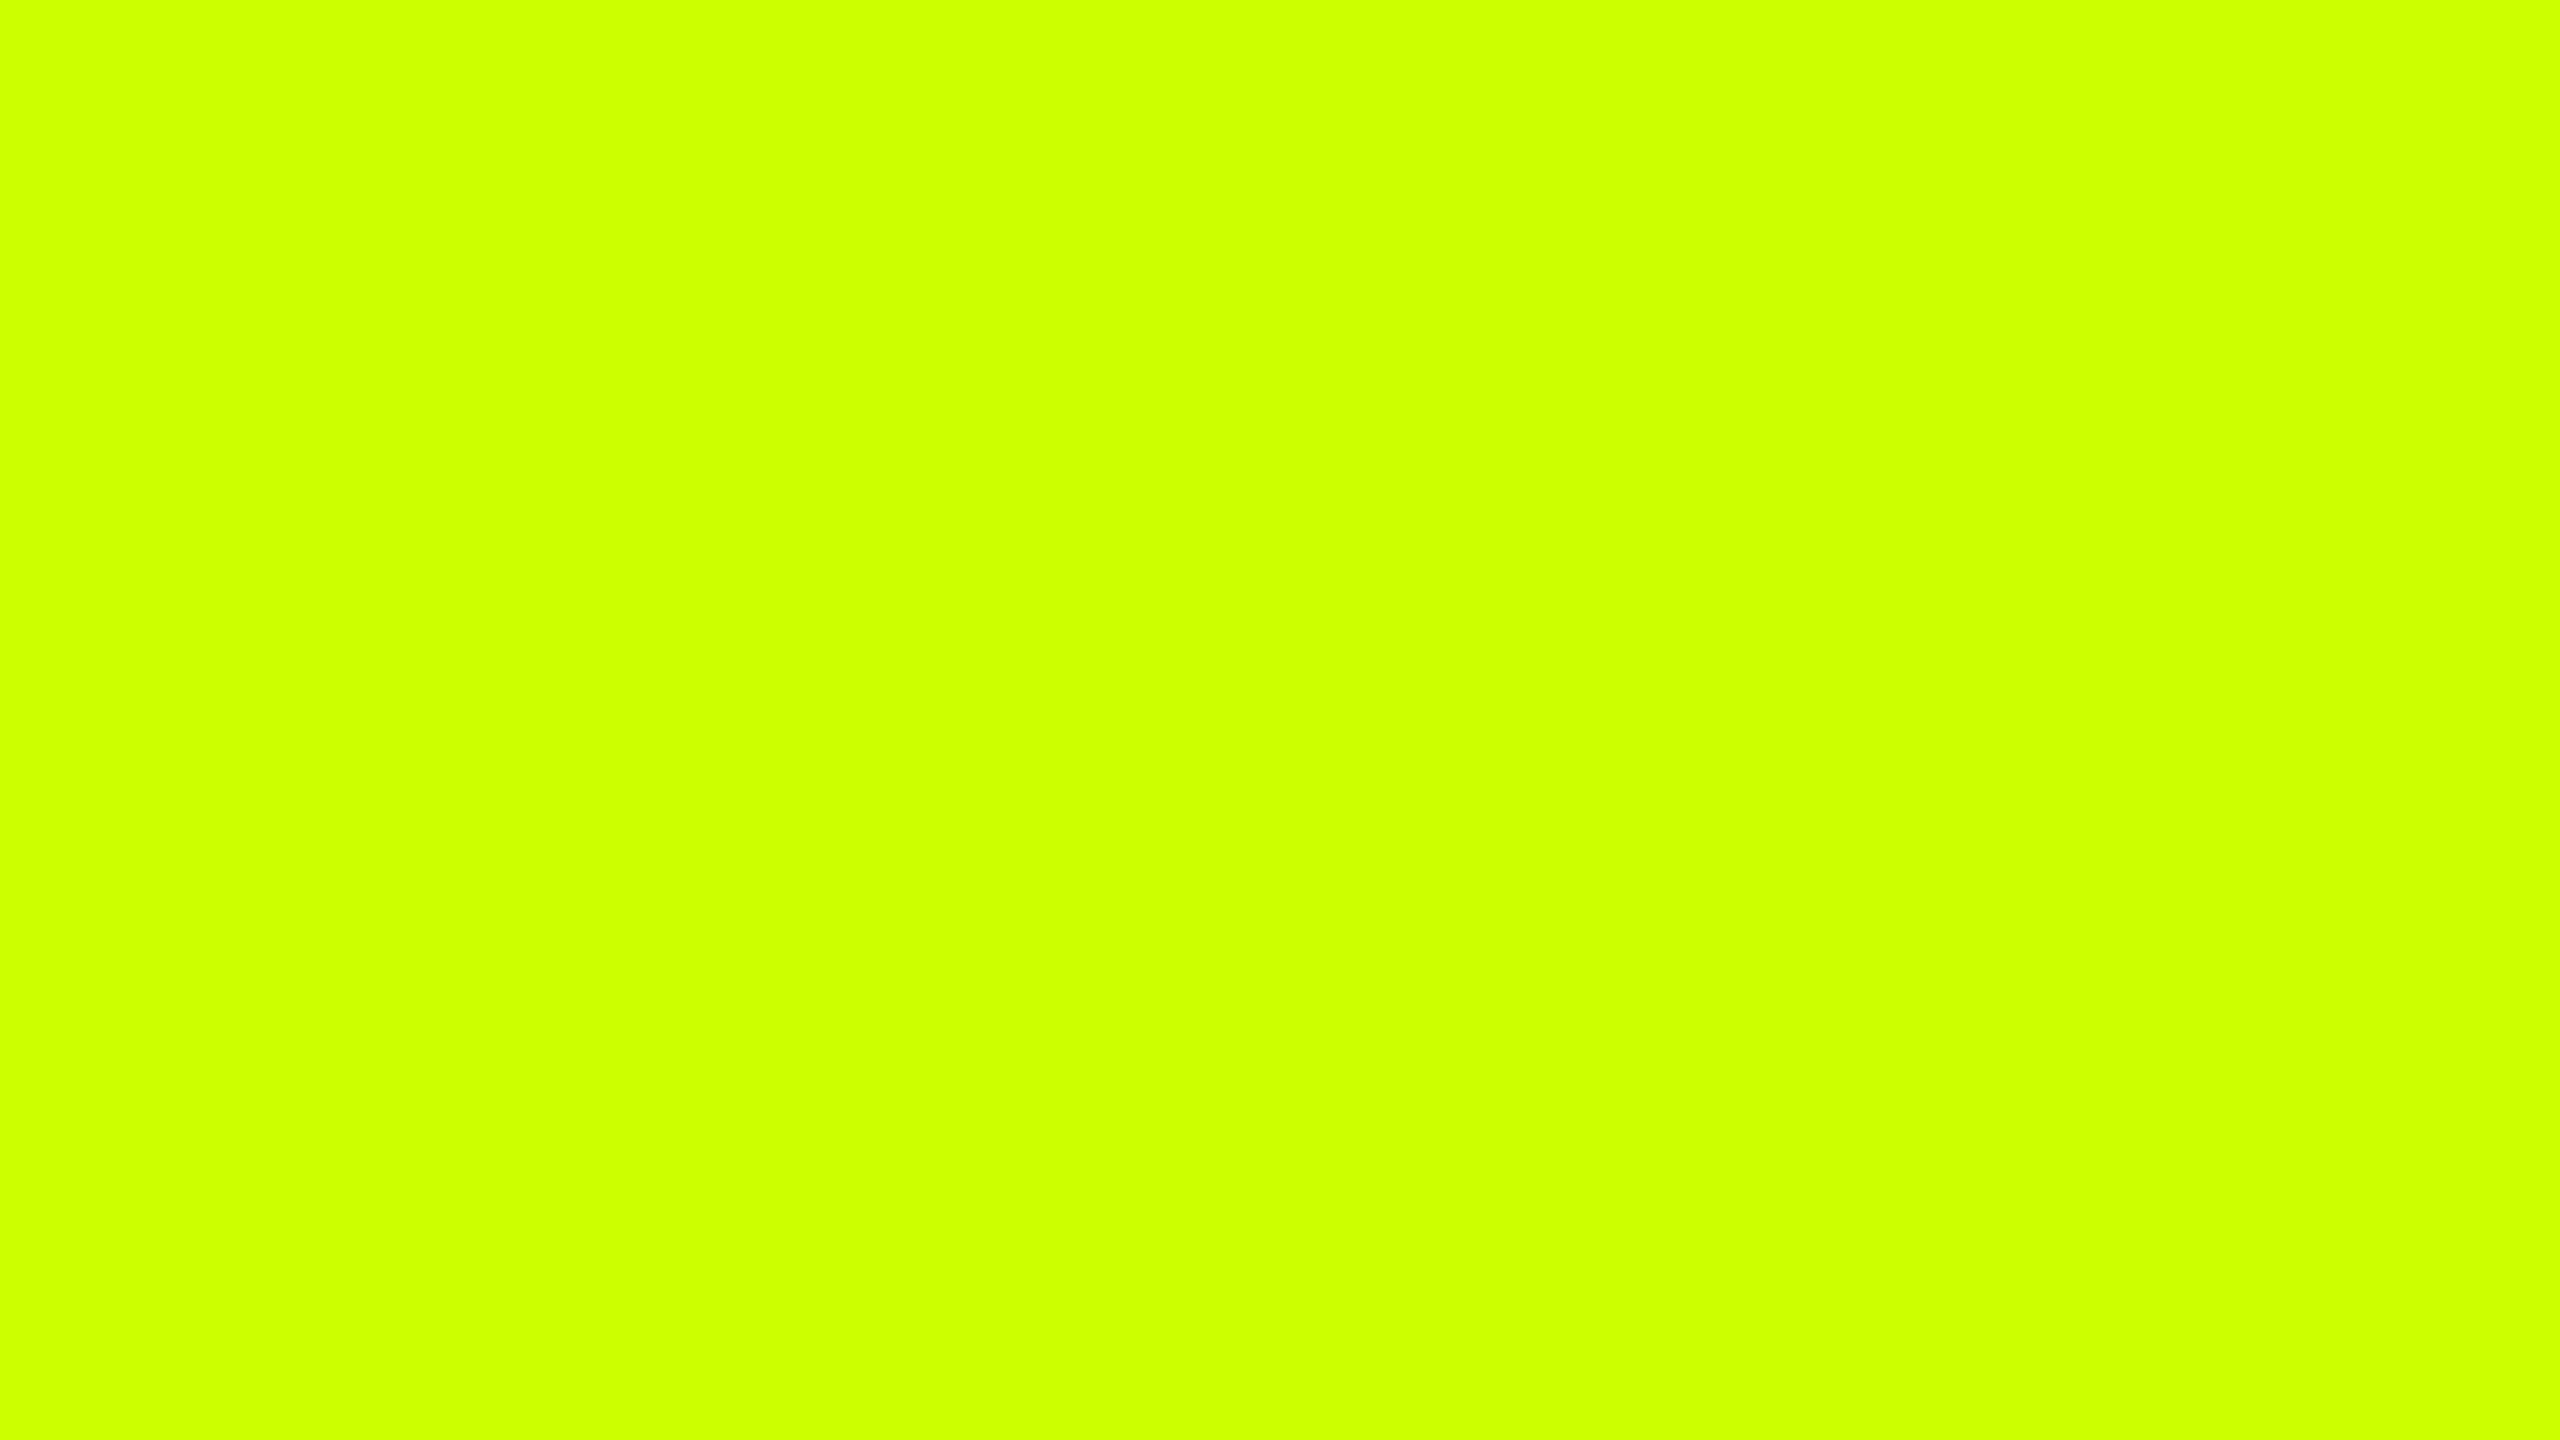 Free 2560x1440 resolution Fluorescent Yellow solid color background 2560x1440